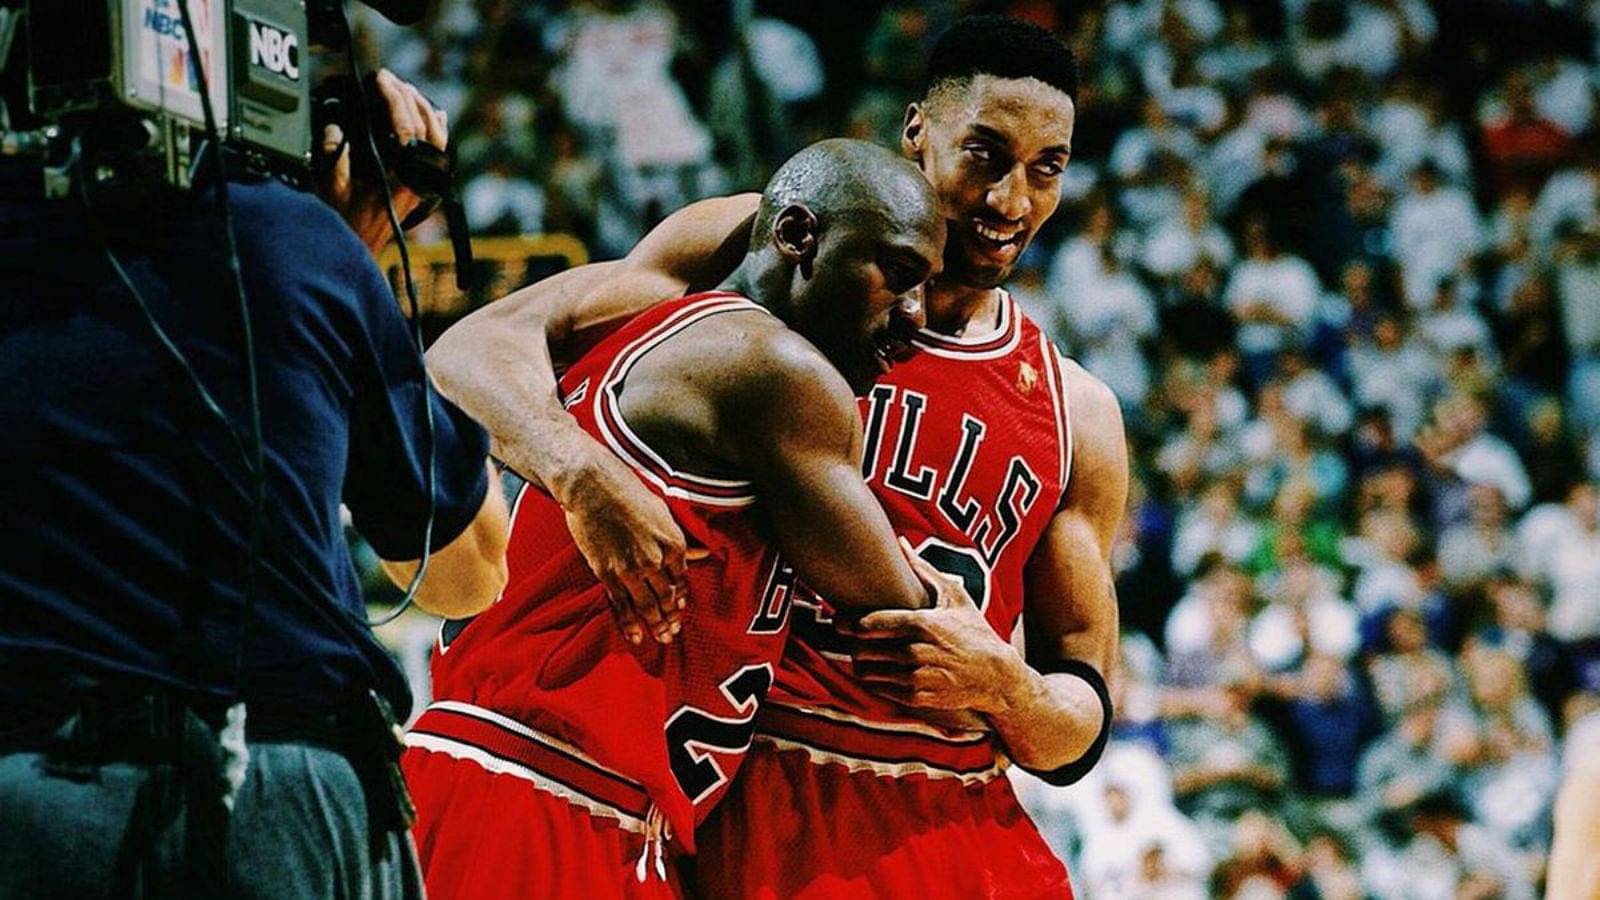 Cover Image for “We thought Michael Jordan had altitude sickness”: The Flu Game as revealed by Chicago Bulls’ team physician from 1997 NBA Finals